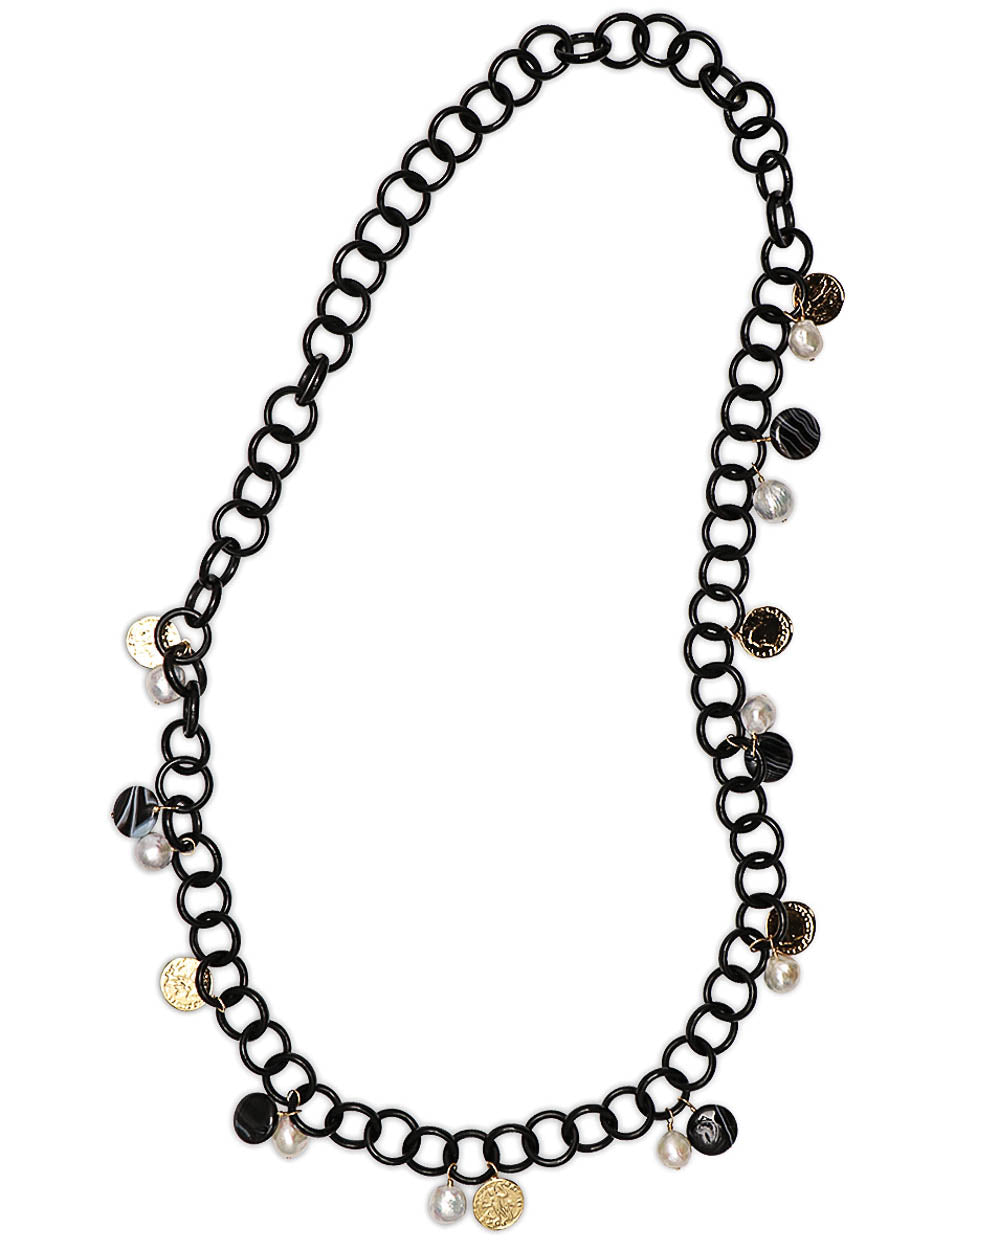 Black Horn Link Necklace with Coin Charms